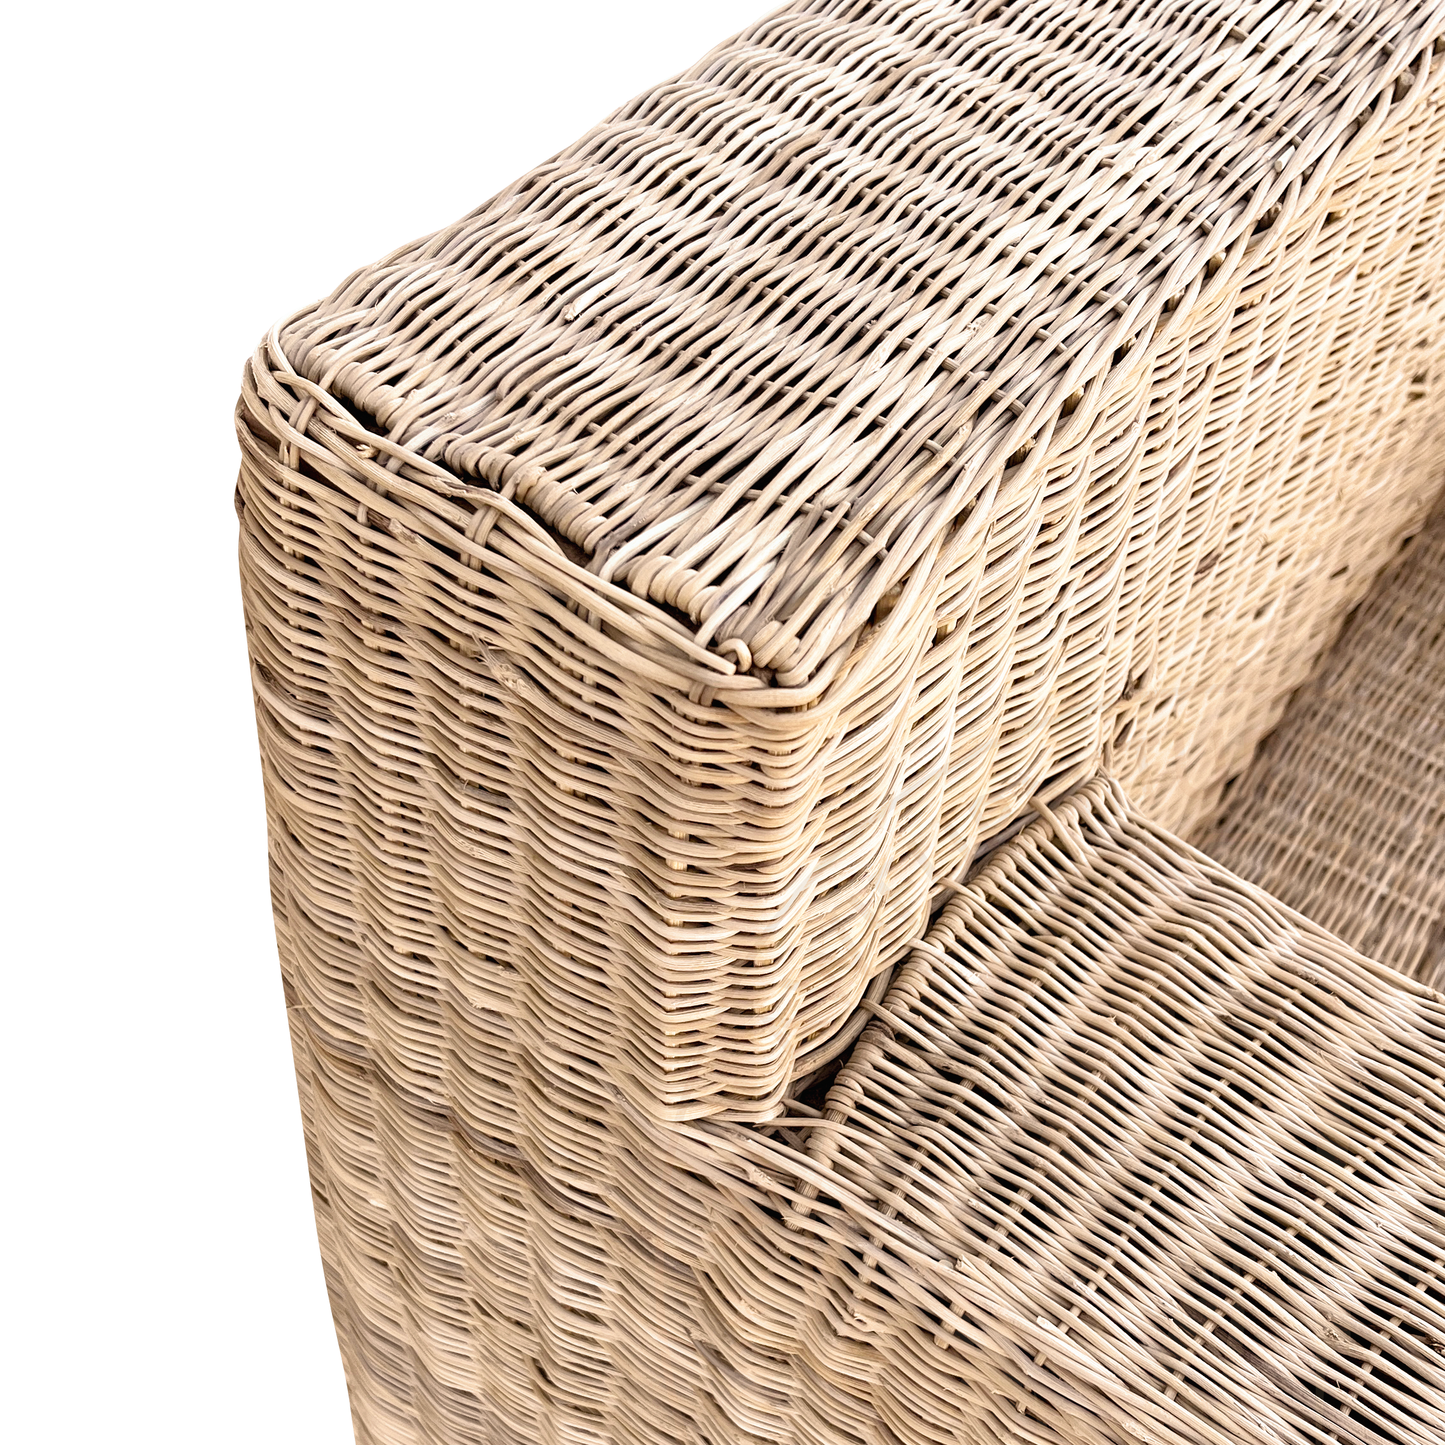 BOX Malawi Couch – Three Seater hand weaved woven rattan cane chair malawi patio outdoor